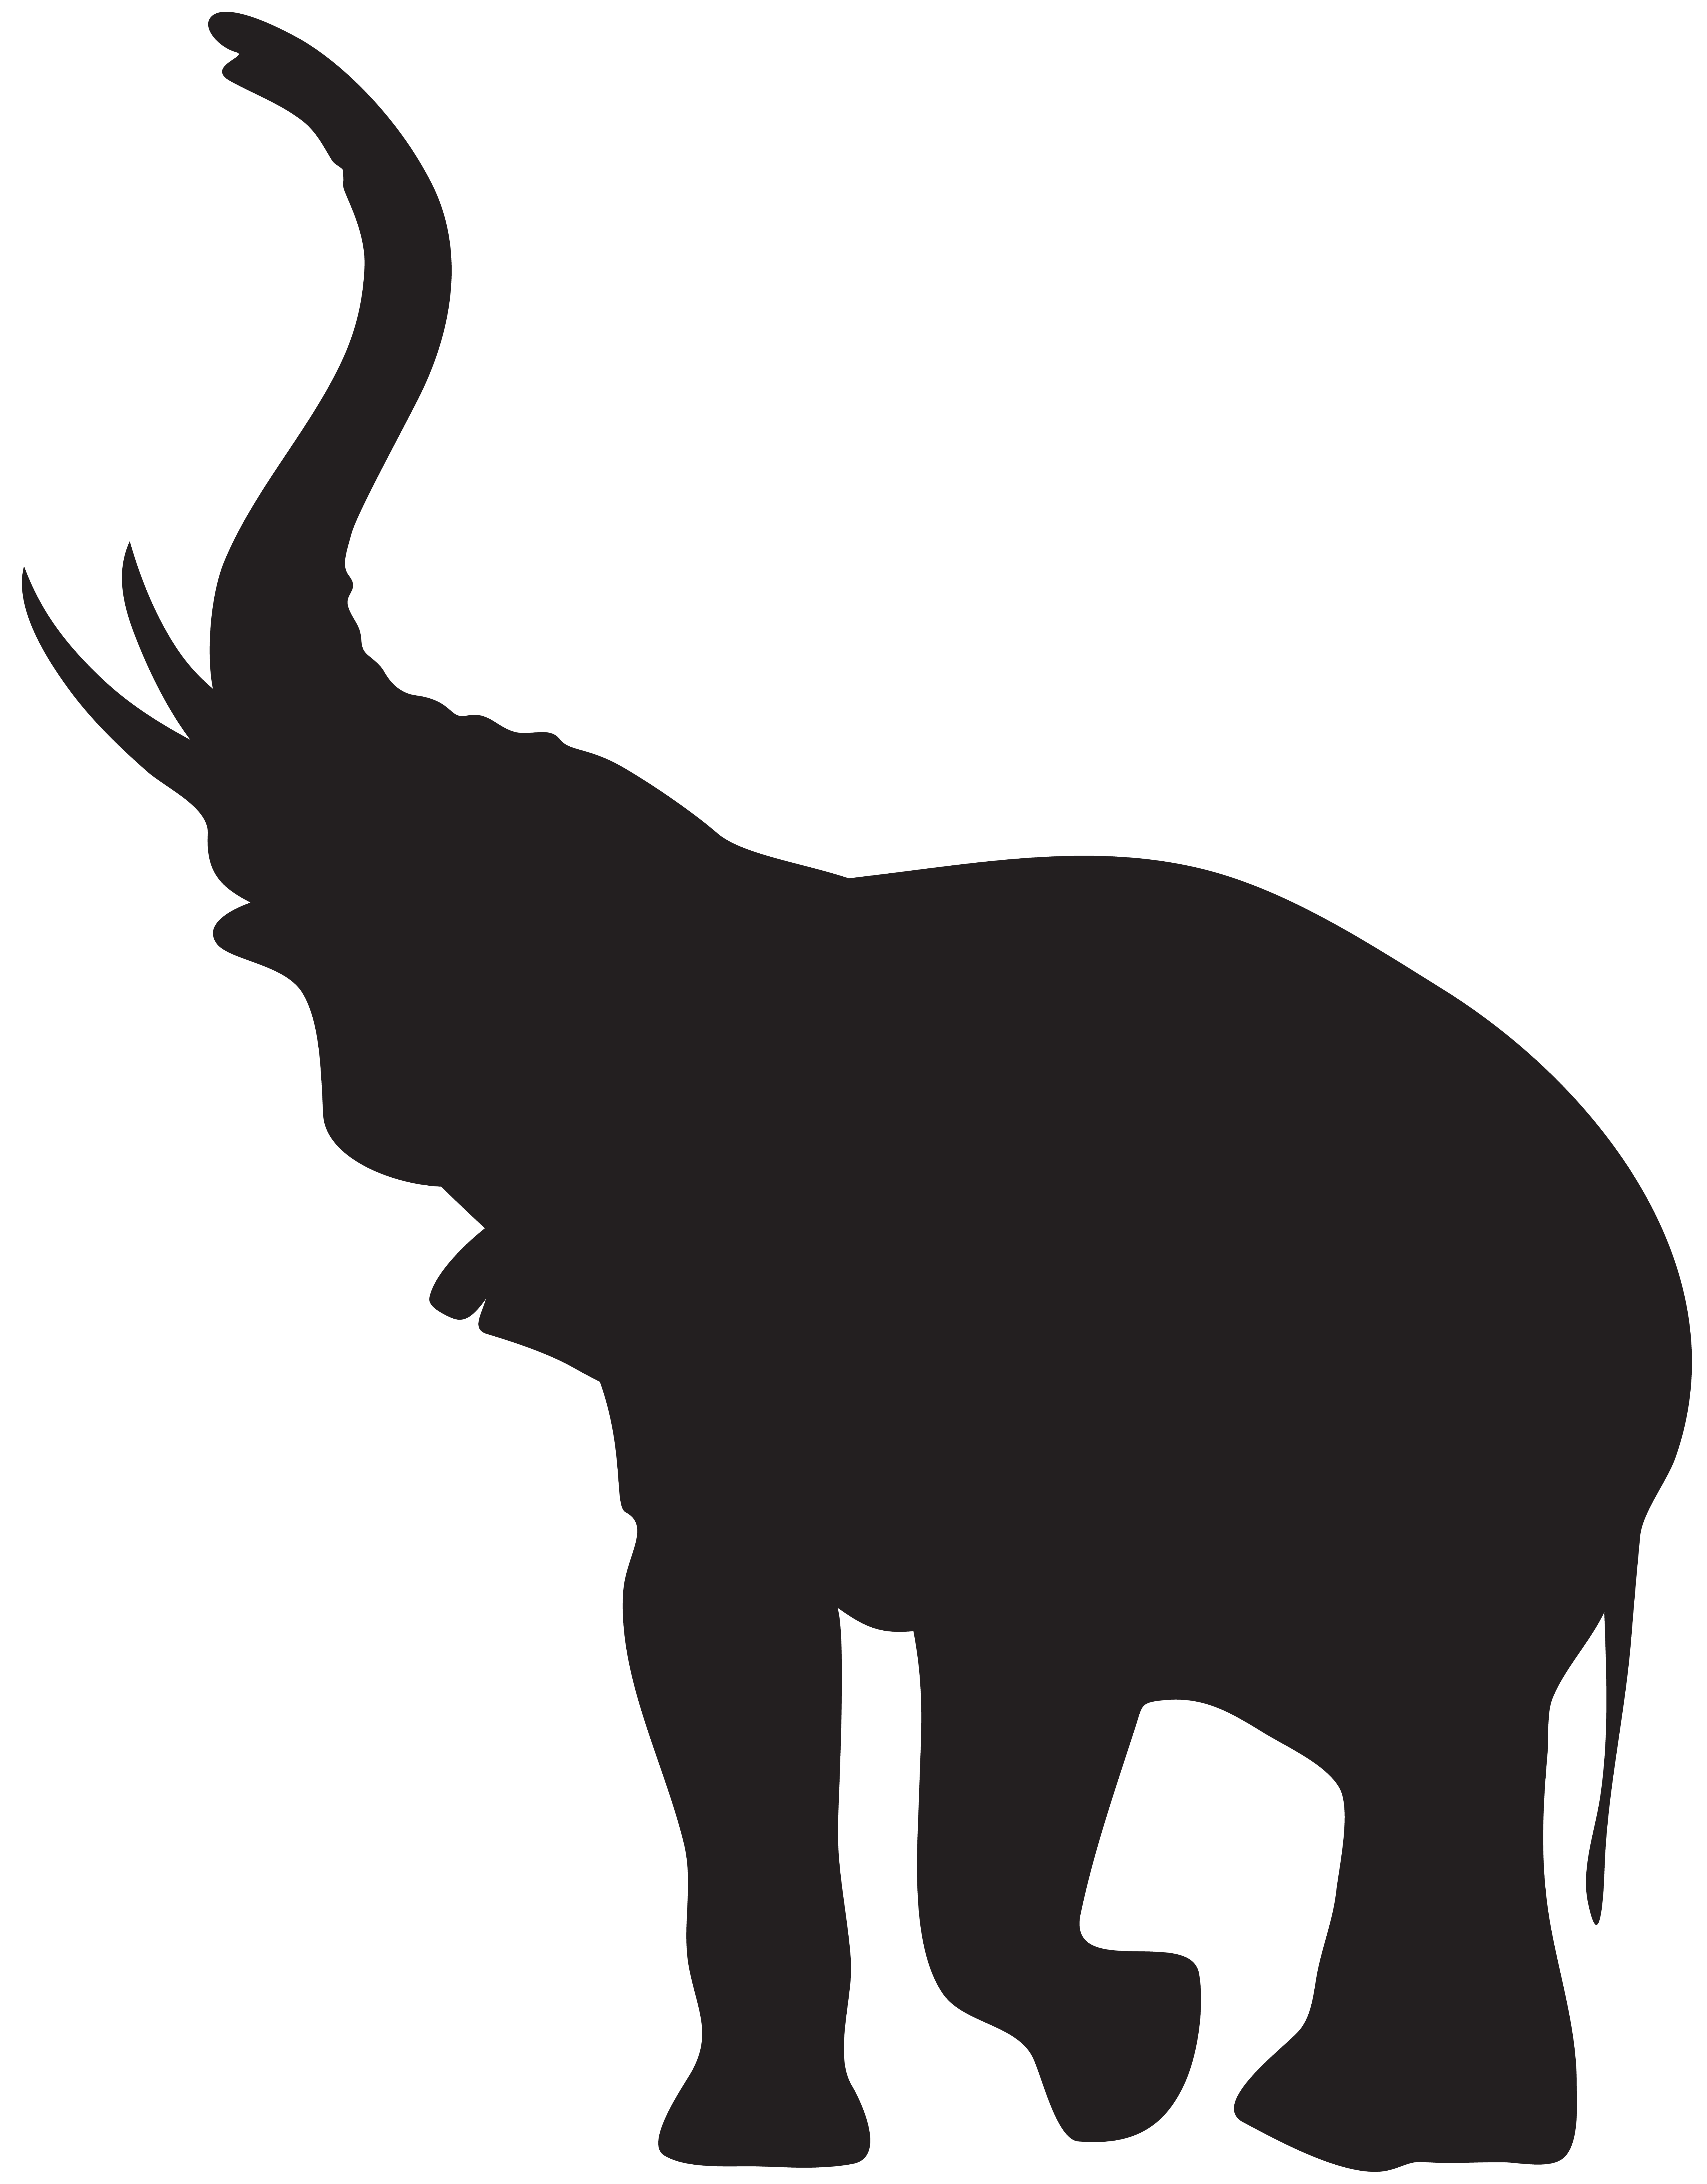 African Elephant Silhouette Clip Art Elephant Silhouette Png Clip | The ...